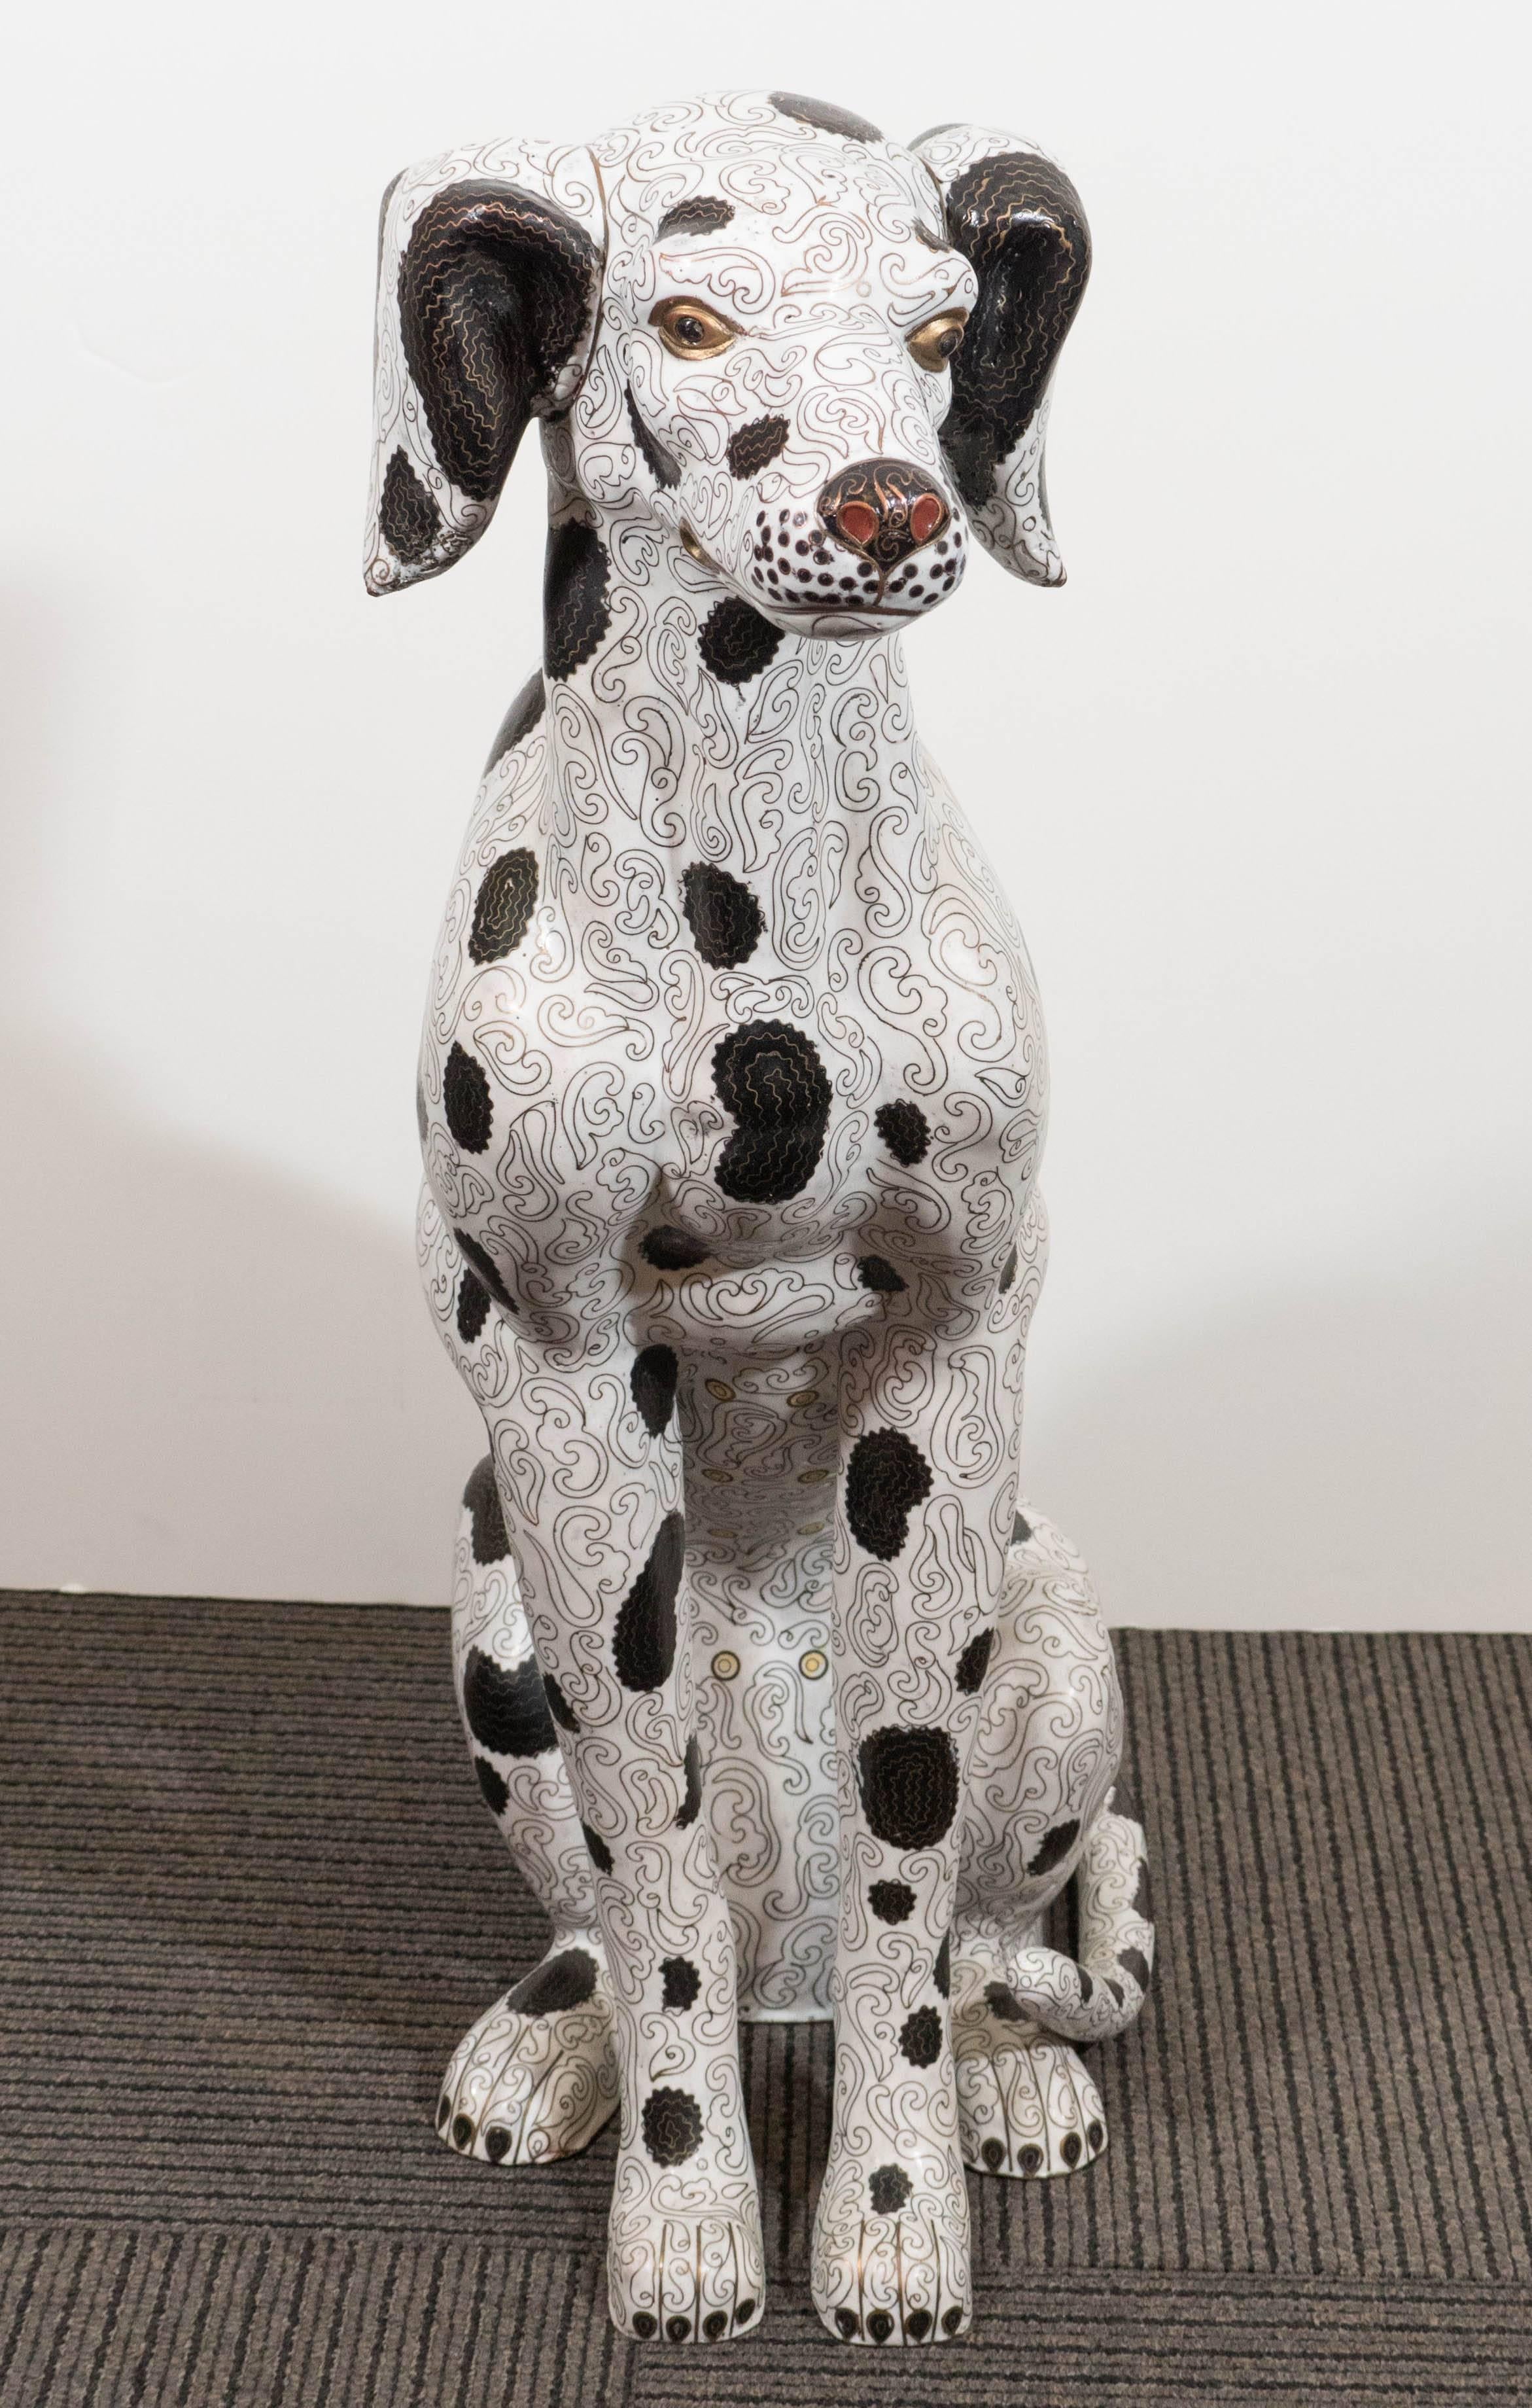 This Chinese cloisonne sculpture of a Dalmatian dog comes in cast bronze, decorated with scrolling designs against a white ground and stylistic black spots, with painted detail to the eyes and face. Overall good condition, with age appropriate wear